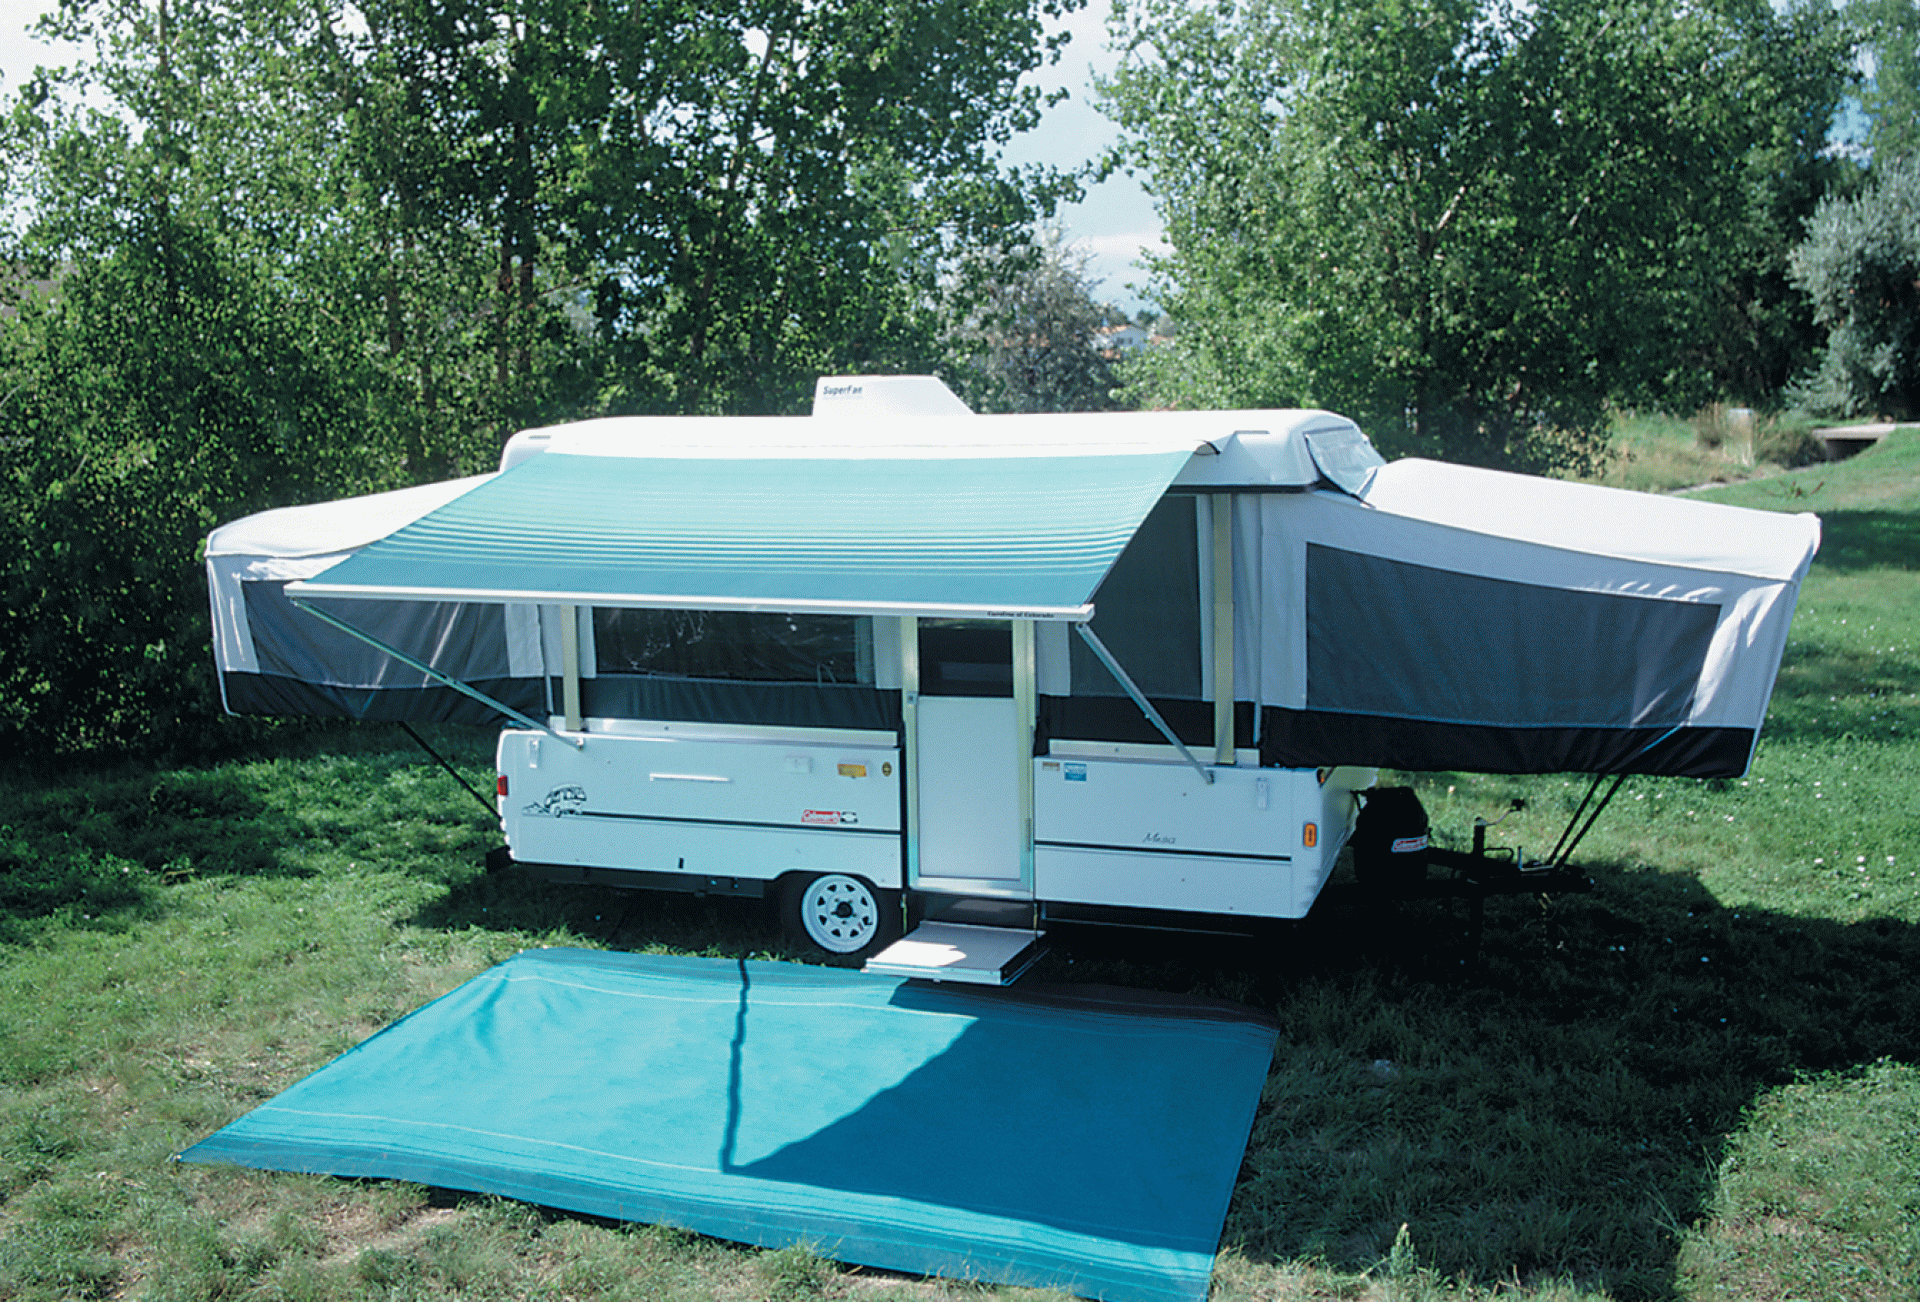 CAREFREE OF COLORADO | 981018A00 | Campout Awning Metric 2.5 Metric 8' 5" Sierra Brown Dune Stripe with White Bag